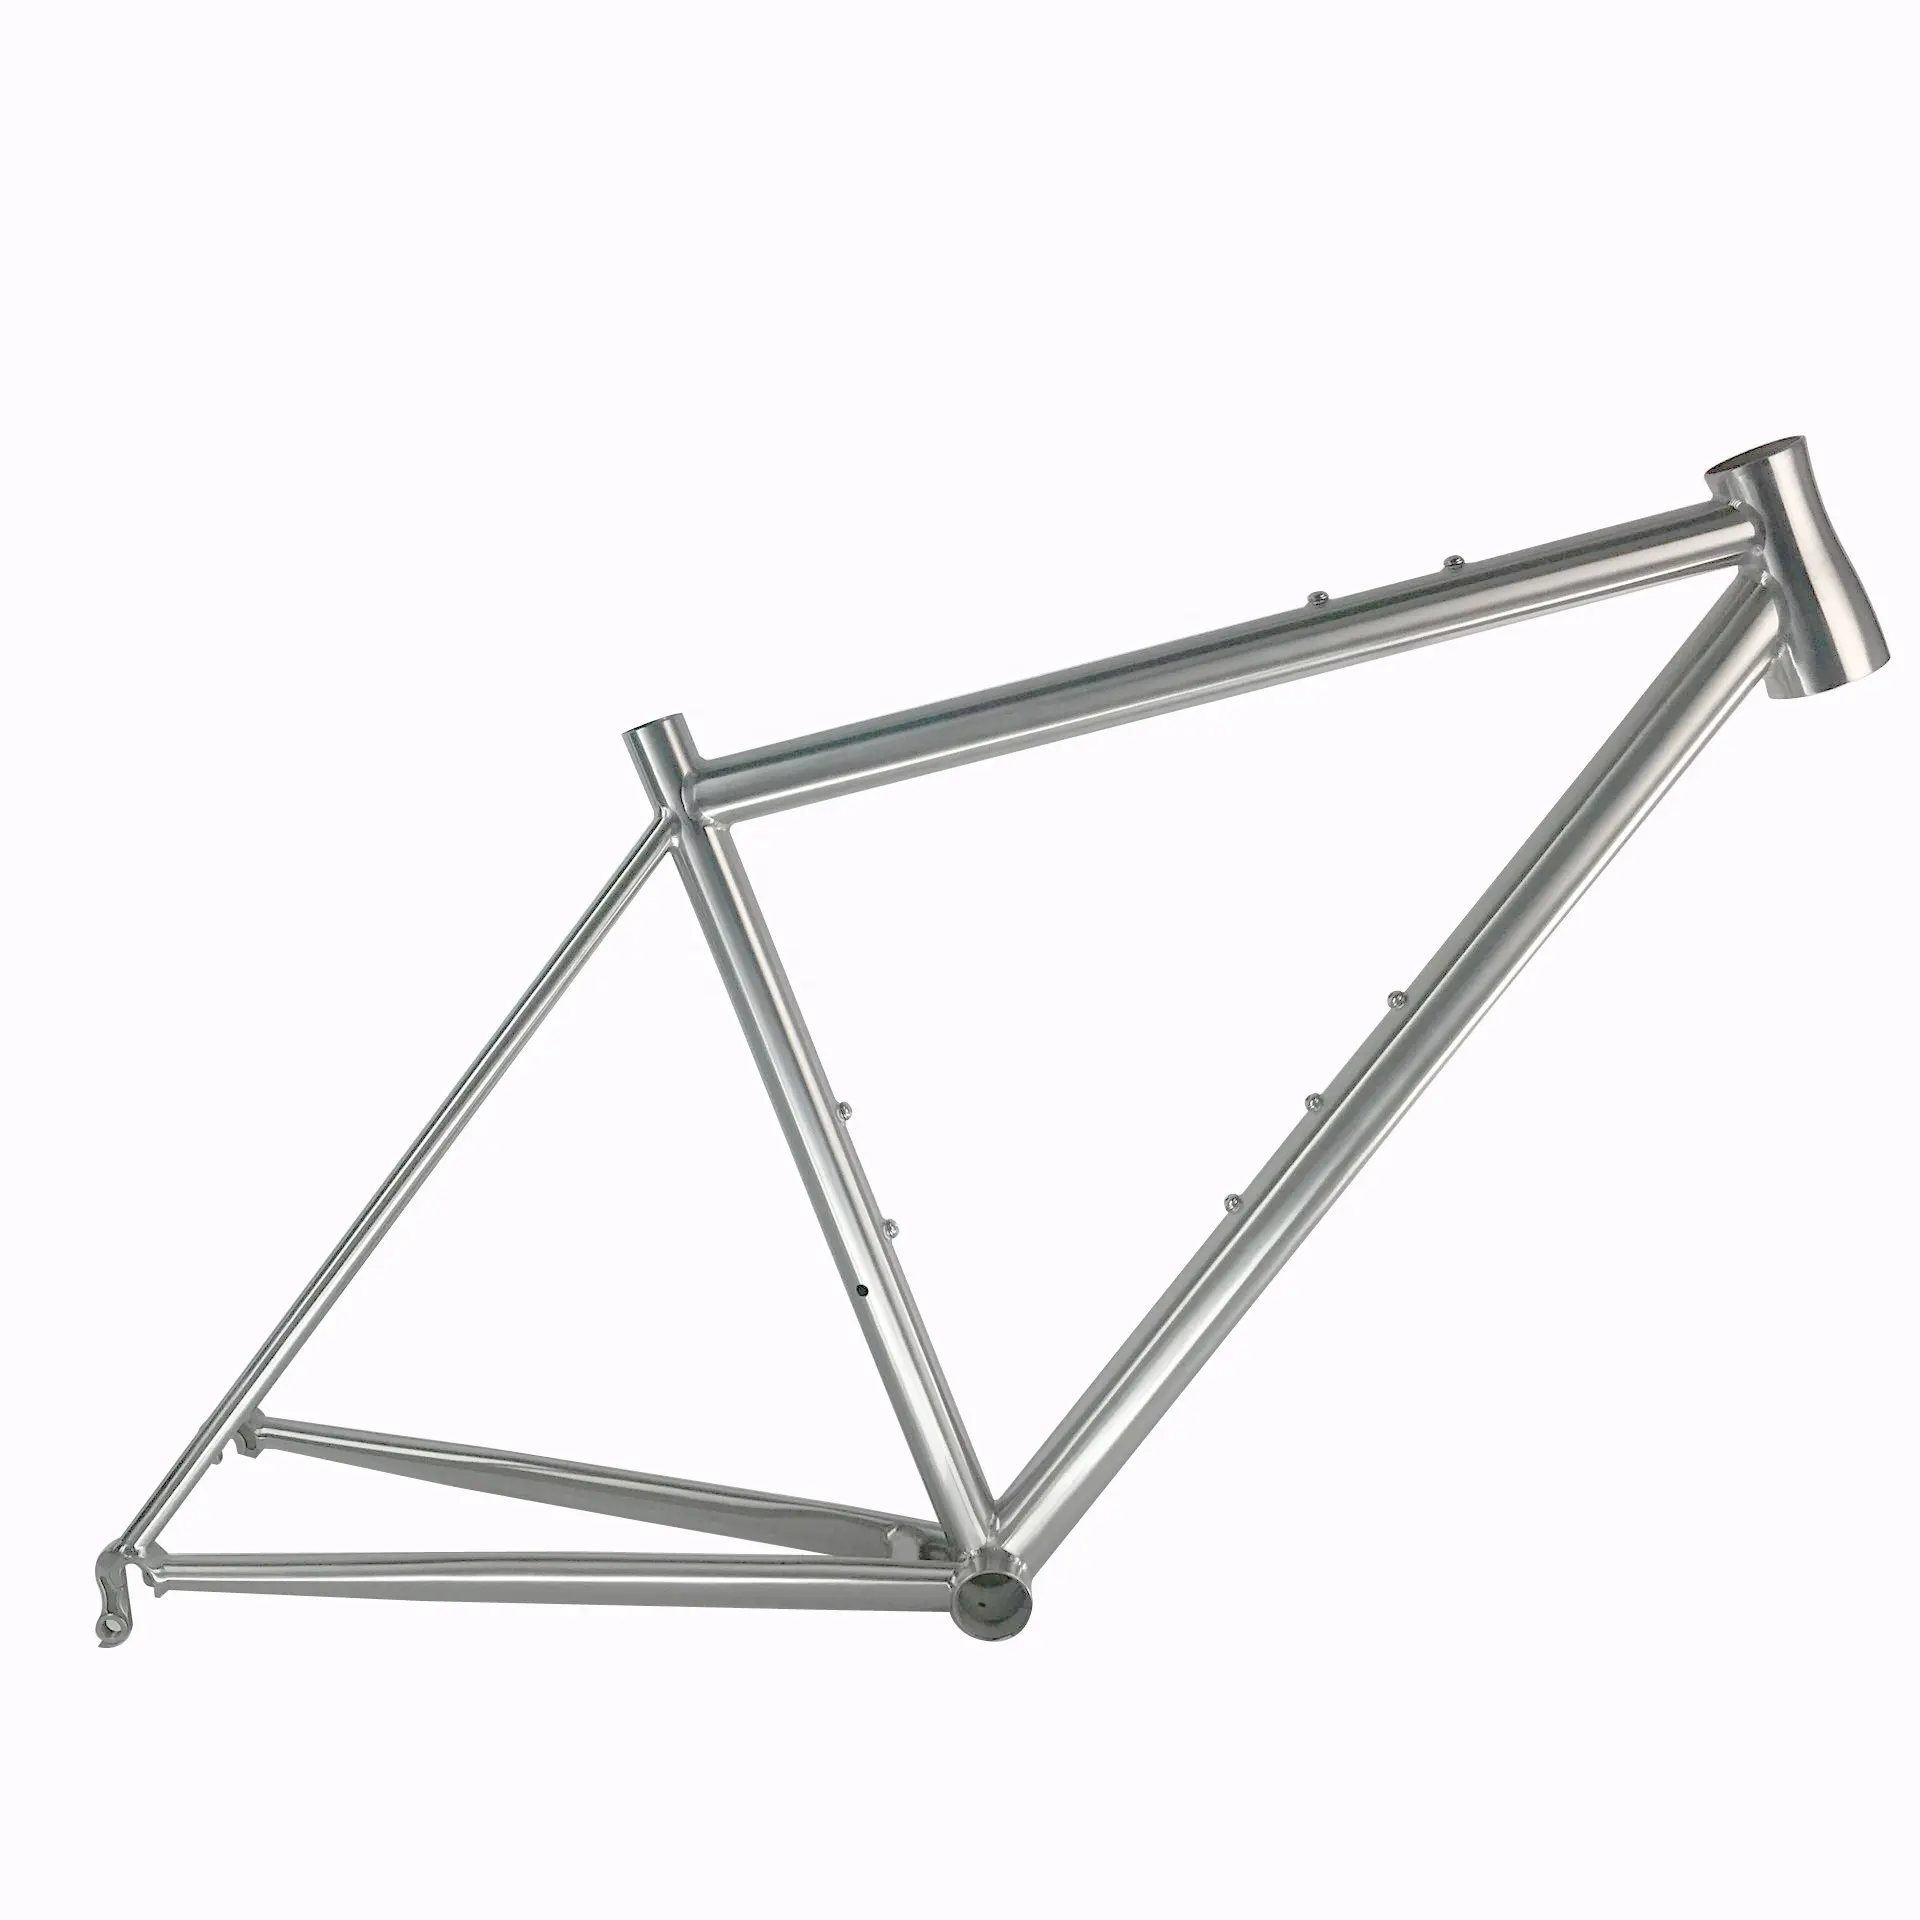 titanium road bike frame with integrated head tube and replaceable dropouts waltly made ti bike frame OEM